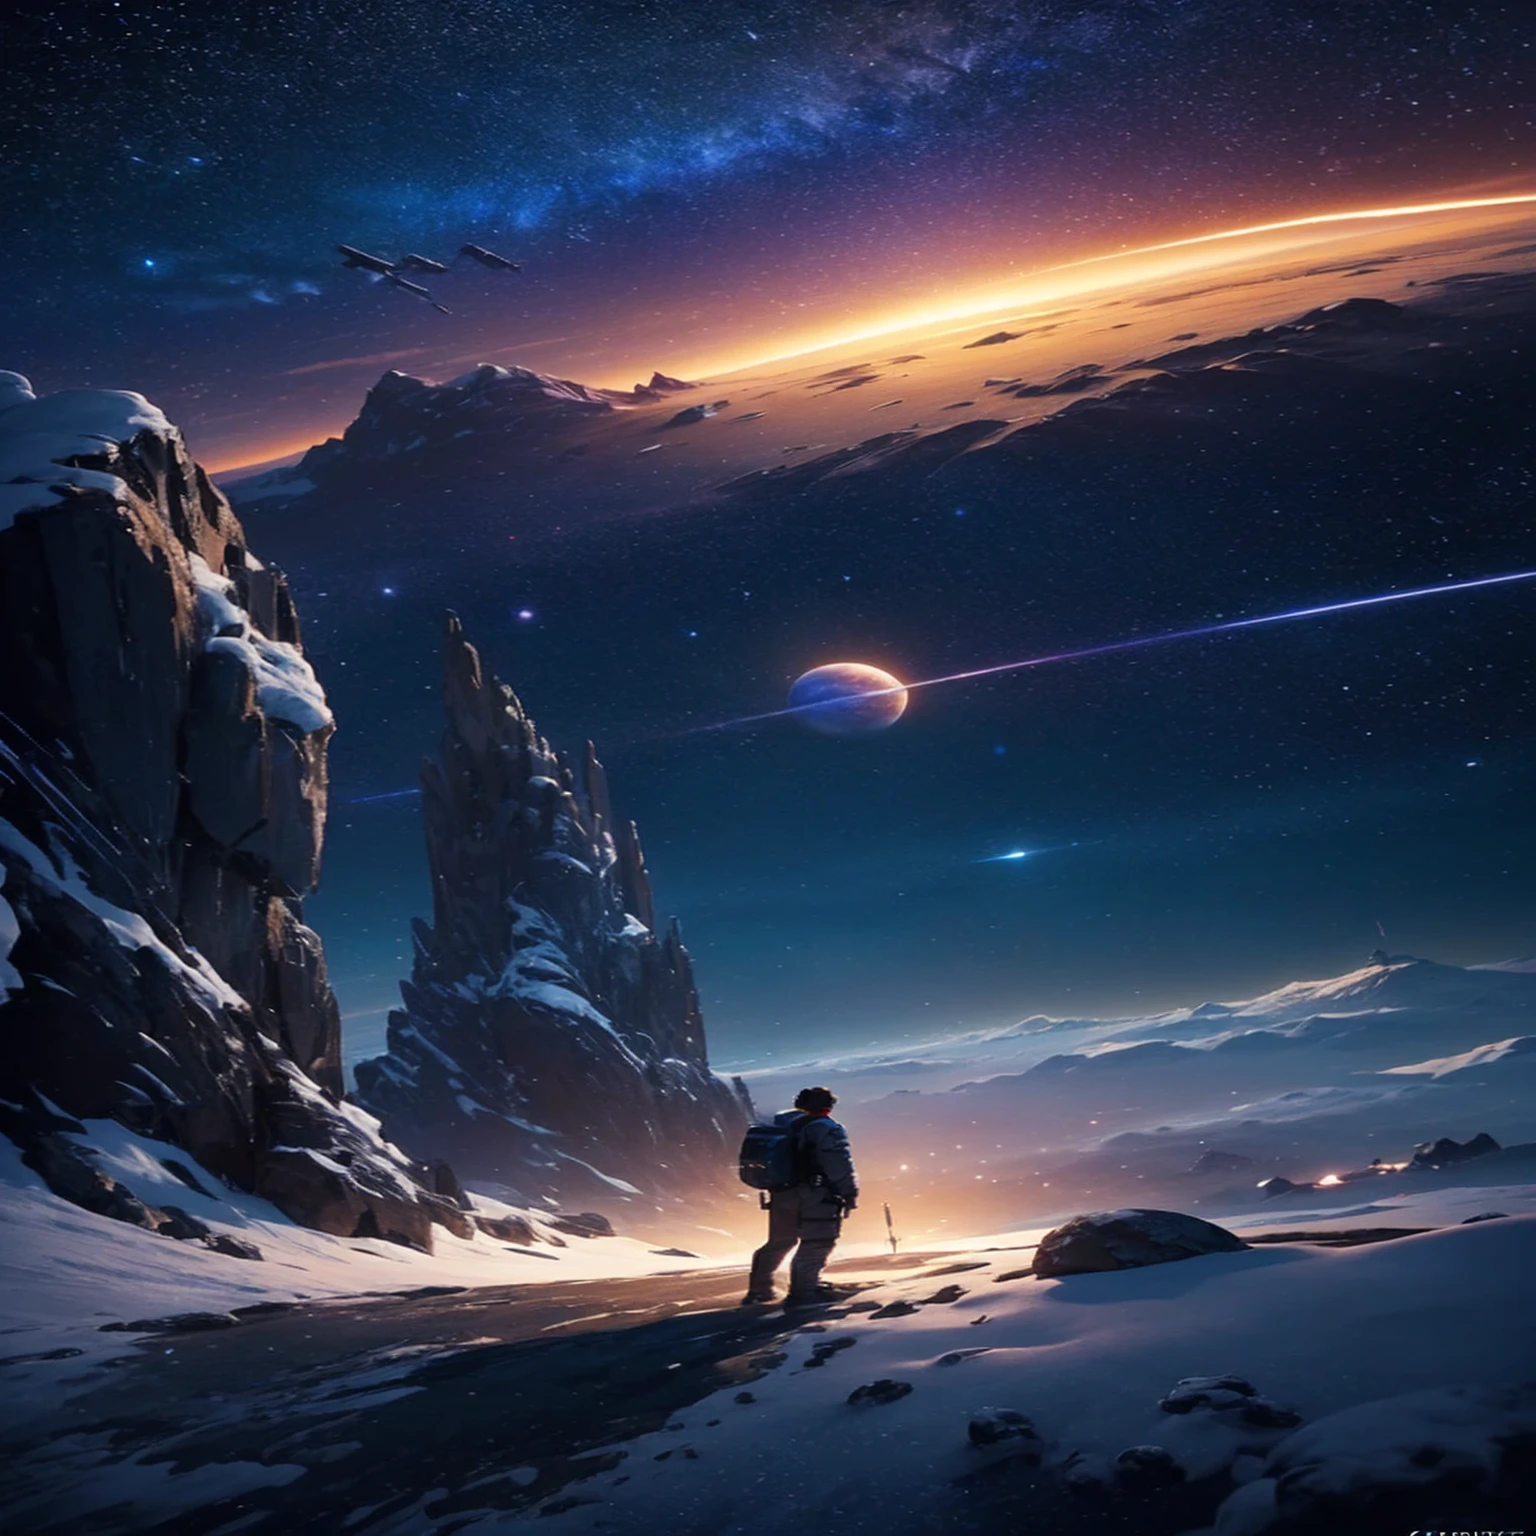 A man standing on a hill，Gaze at a planet and a star in the sky, Inspired by Jessica Rossier, beautiful Science Fiction Art, jessica rossier fantasy art, author：Christopher Balaskas, 4k highly detailed digital art, Sci-fi fantasy wallpaper, Science Fiction Art, inspired author：Christopher Balaskas, Epic fantasy sci-fi illustration, Science Fiction Artwork